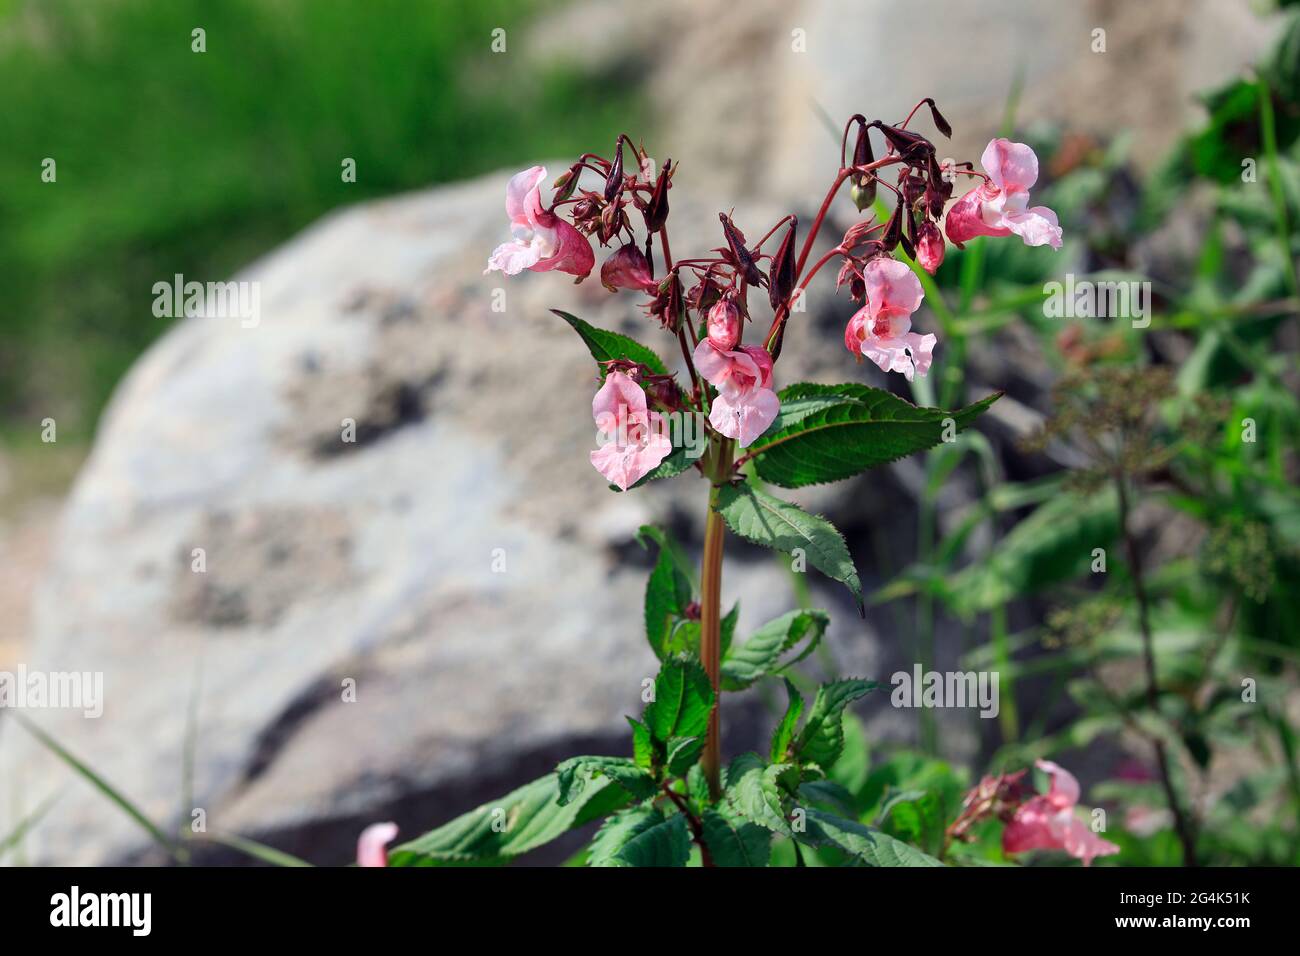 Impatiens glandulifera, Himalayan balsam, is  a large annual plant native to the Himalayas. It is considered an invasive species in many areas. Stock Photo